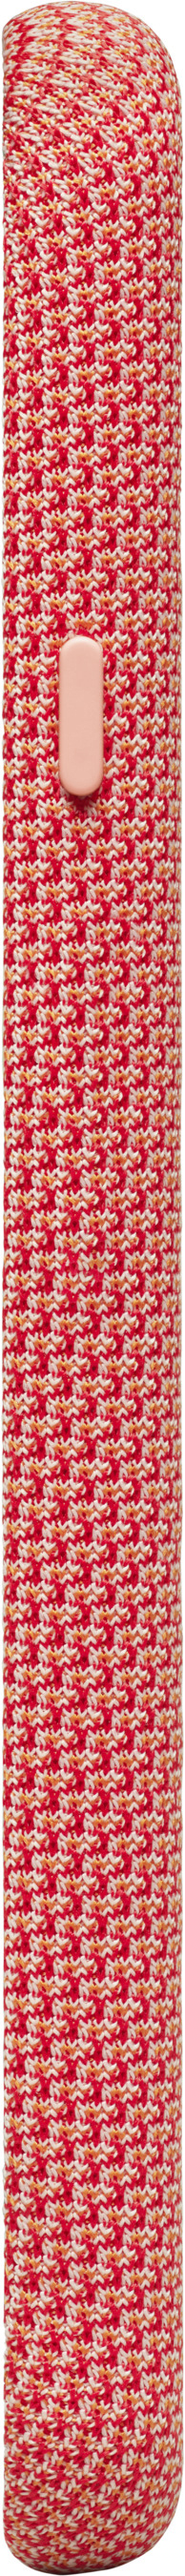 Backcover, Could Google, 4XL, Pixel GOOGLE be HA01278, Coral